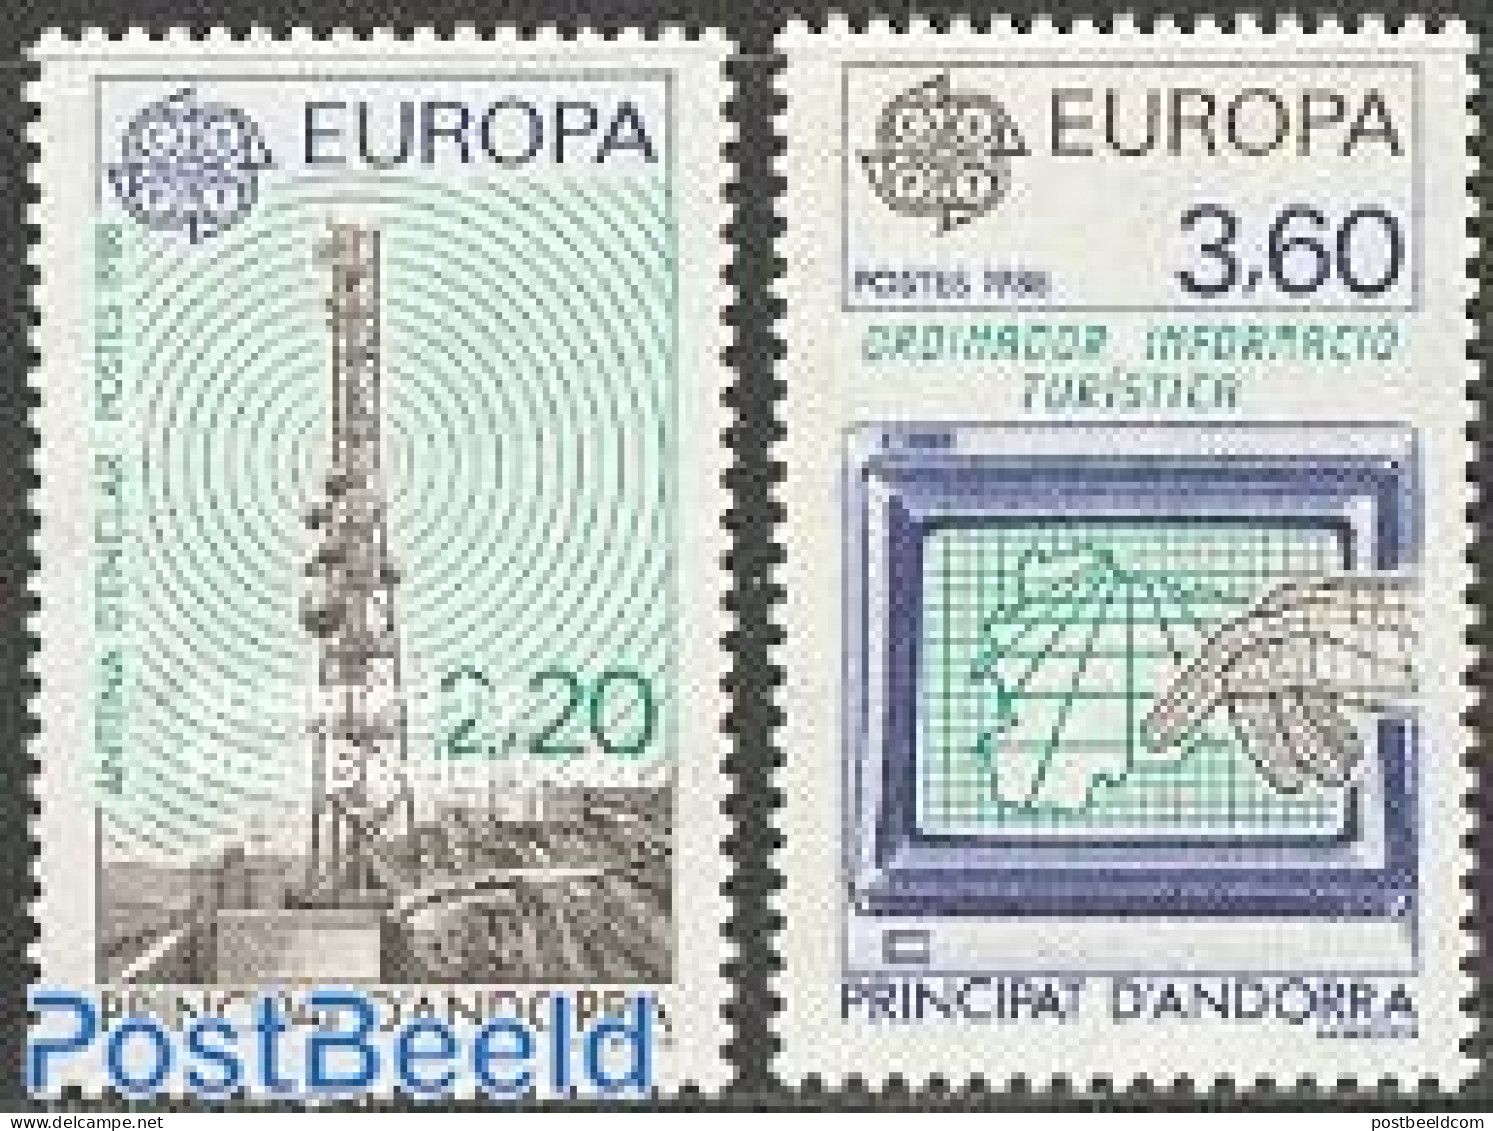 Andorra, French Post 1988 Europa, Telecommunication 2v, Mint NH, History - Science - Europa (cept) - Computers & IT - .. - Ungebraucht